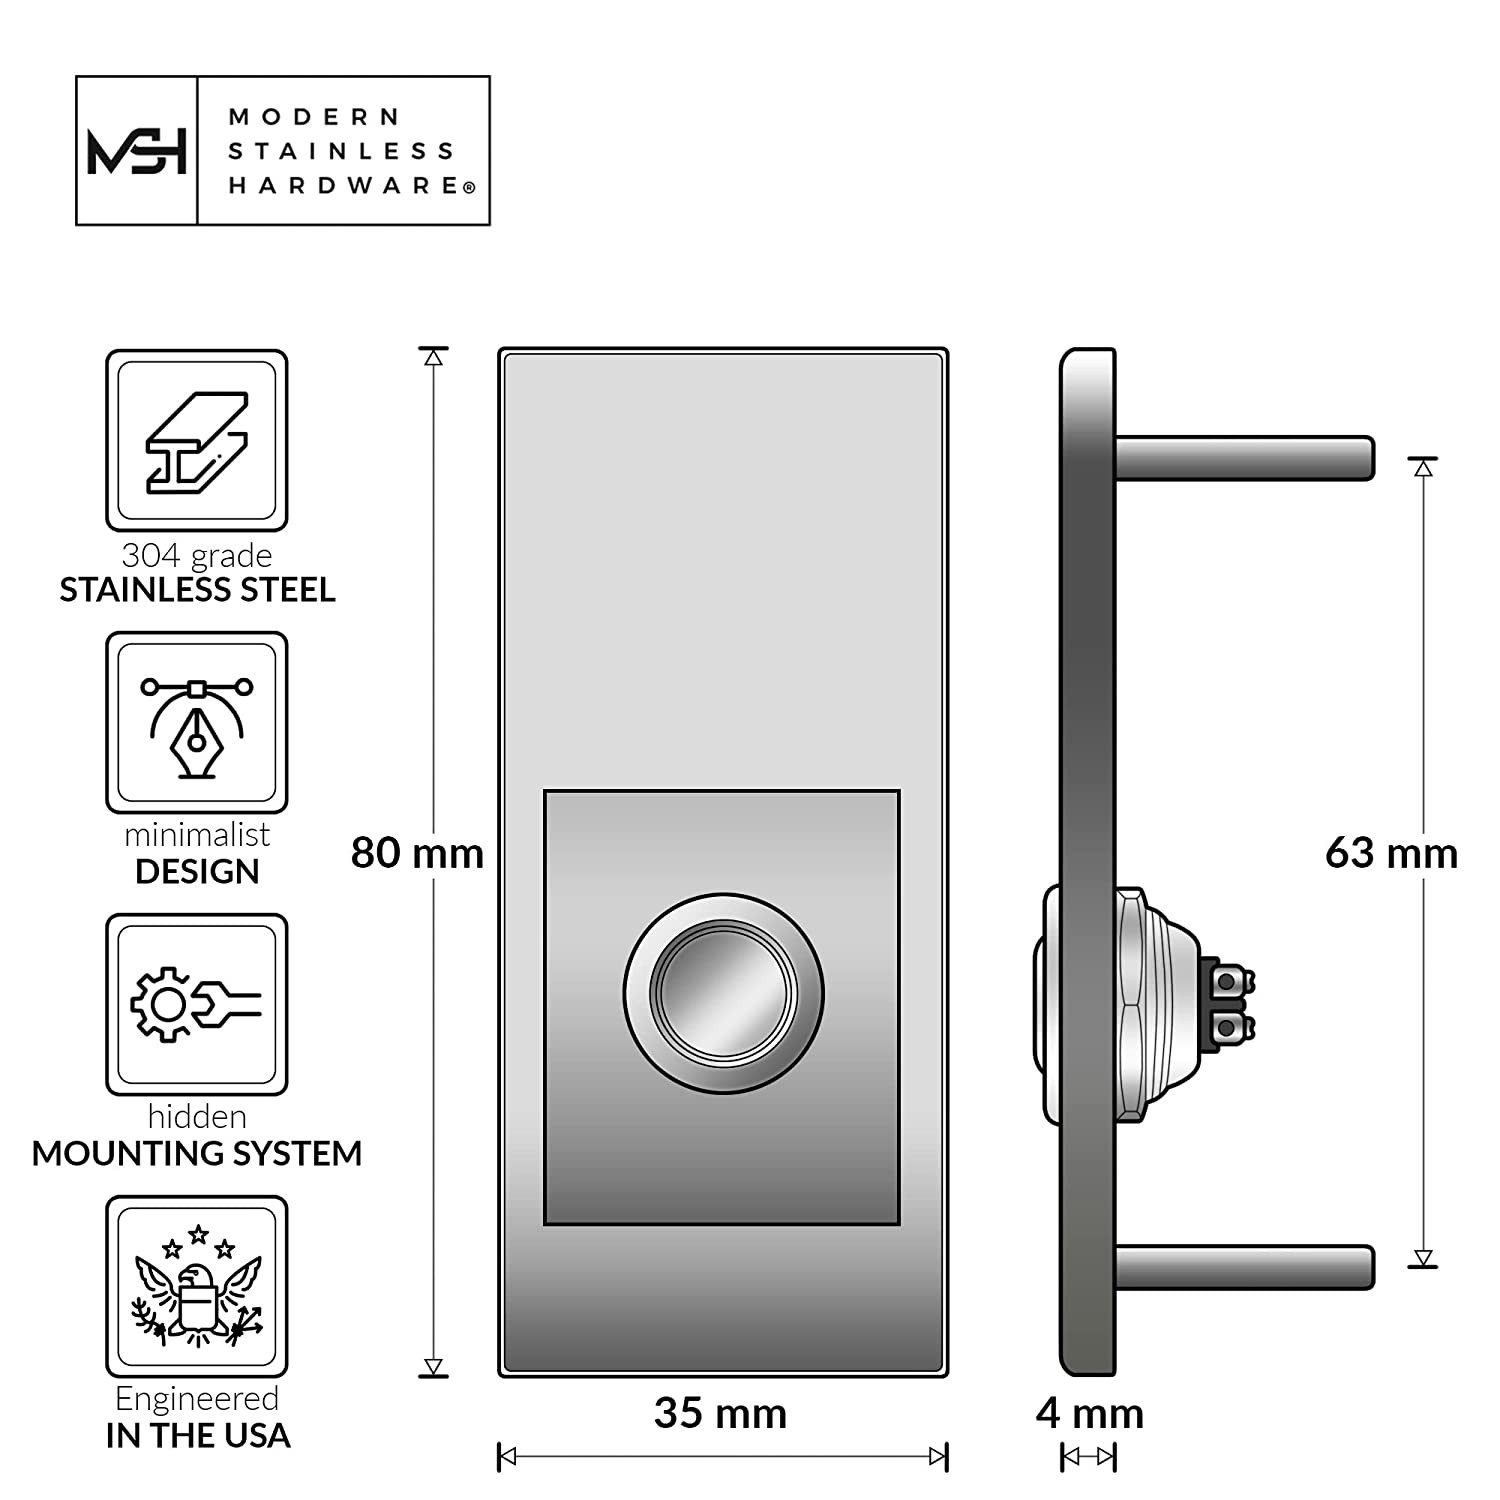 Modern Stainless Hardware R6 Stainless Steel Doorbell Button, 1.37” x 3.14” x 5/32”, 4mm Thick - image 3 of 6